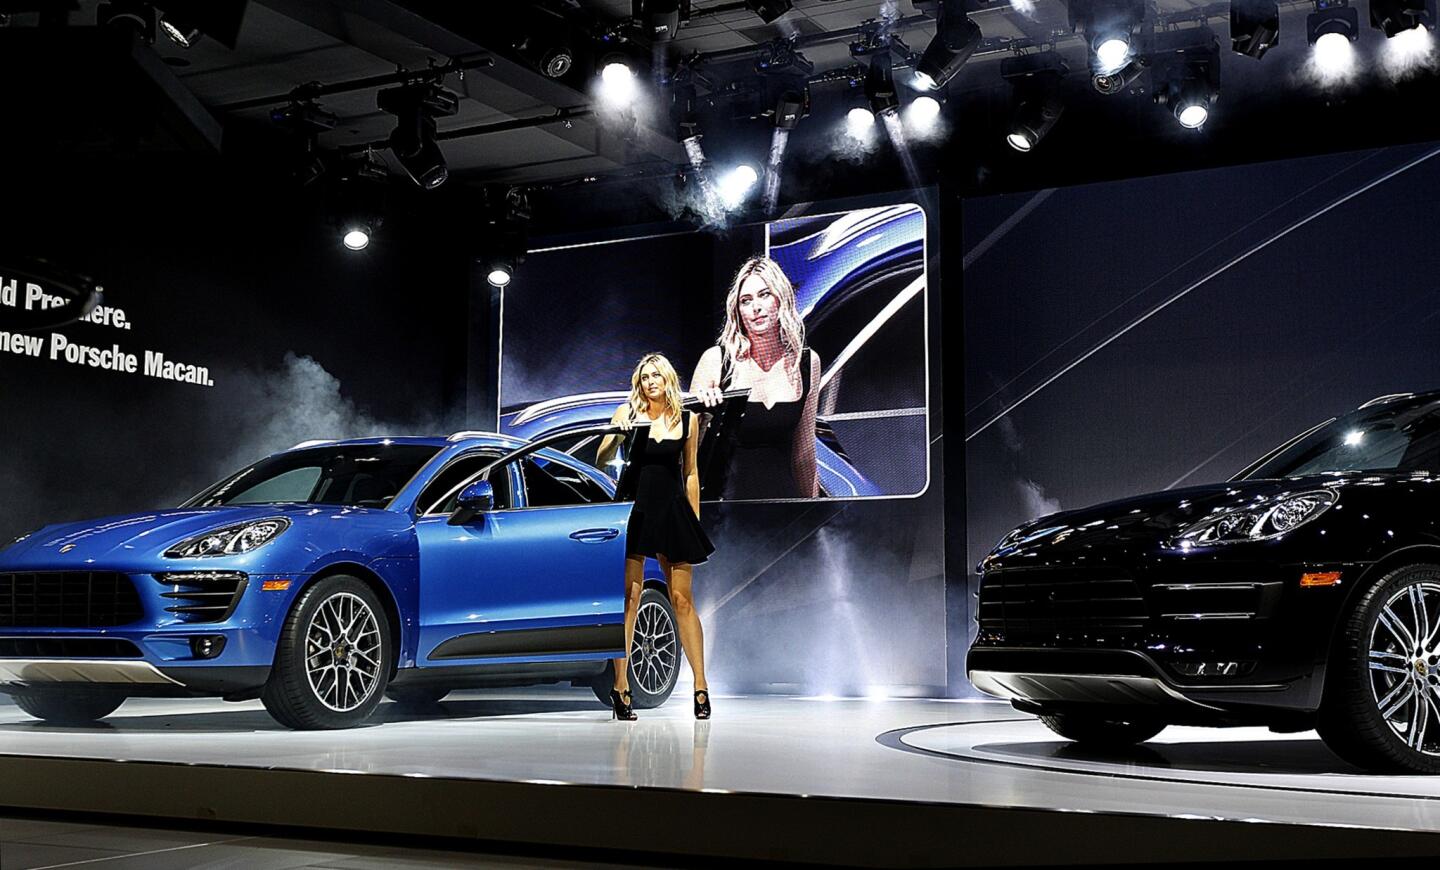 Tennis player Maria Sharapova steps out of a new Porsche Macan shortly after its revealing during the 2013 L.A. Auto Show.